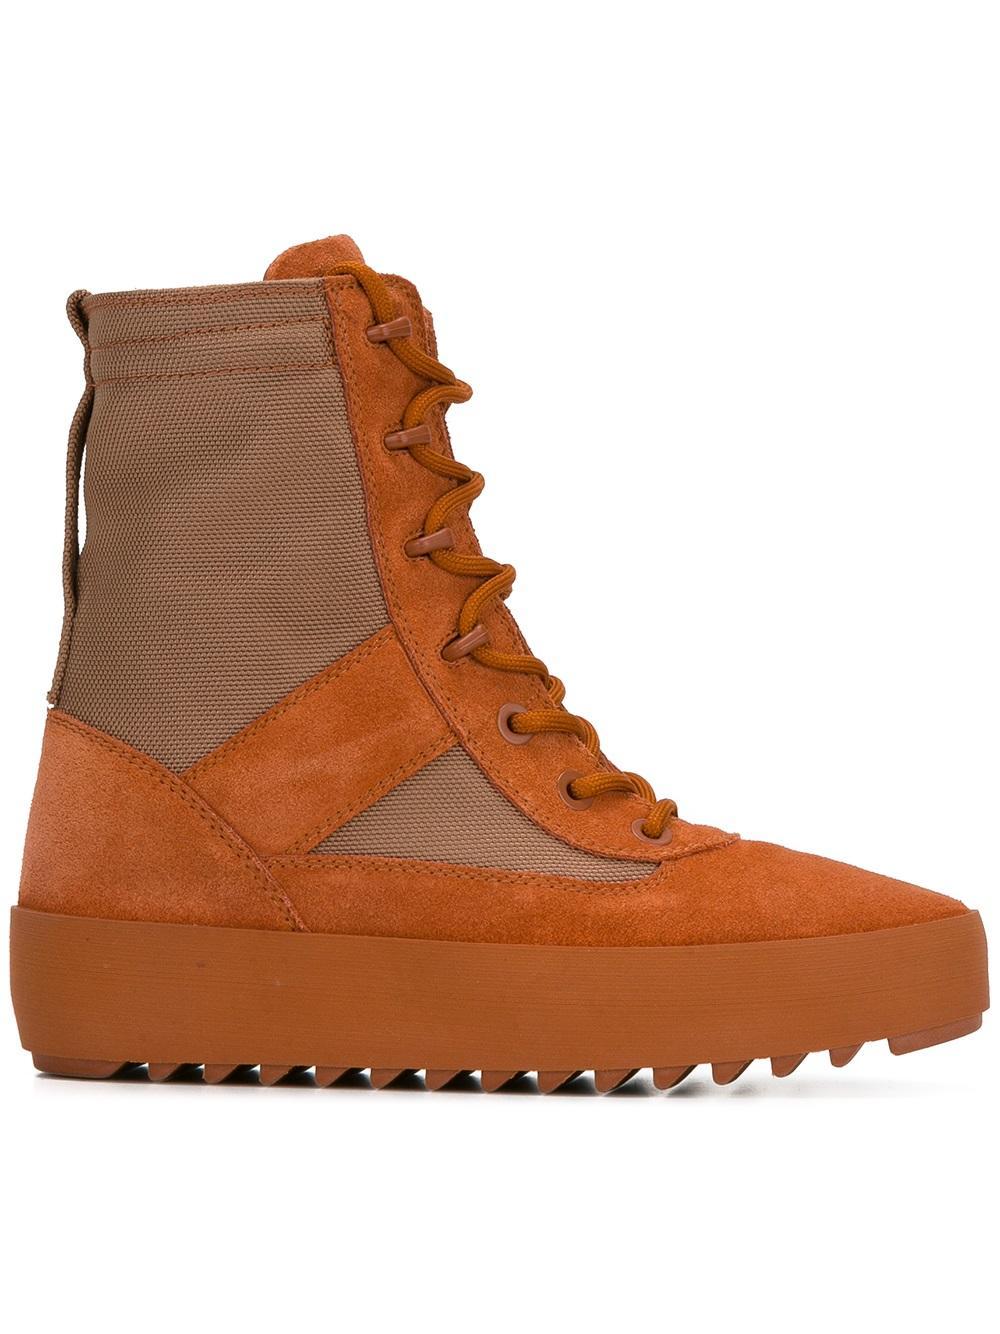 Yeezy Leather Season 3 Military Boots | Lyst